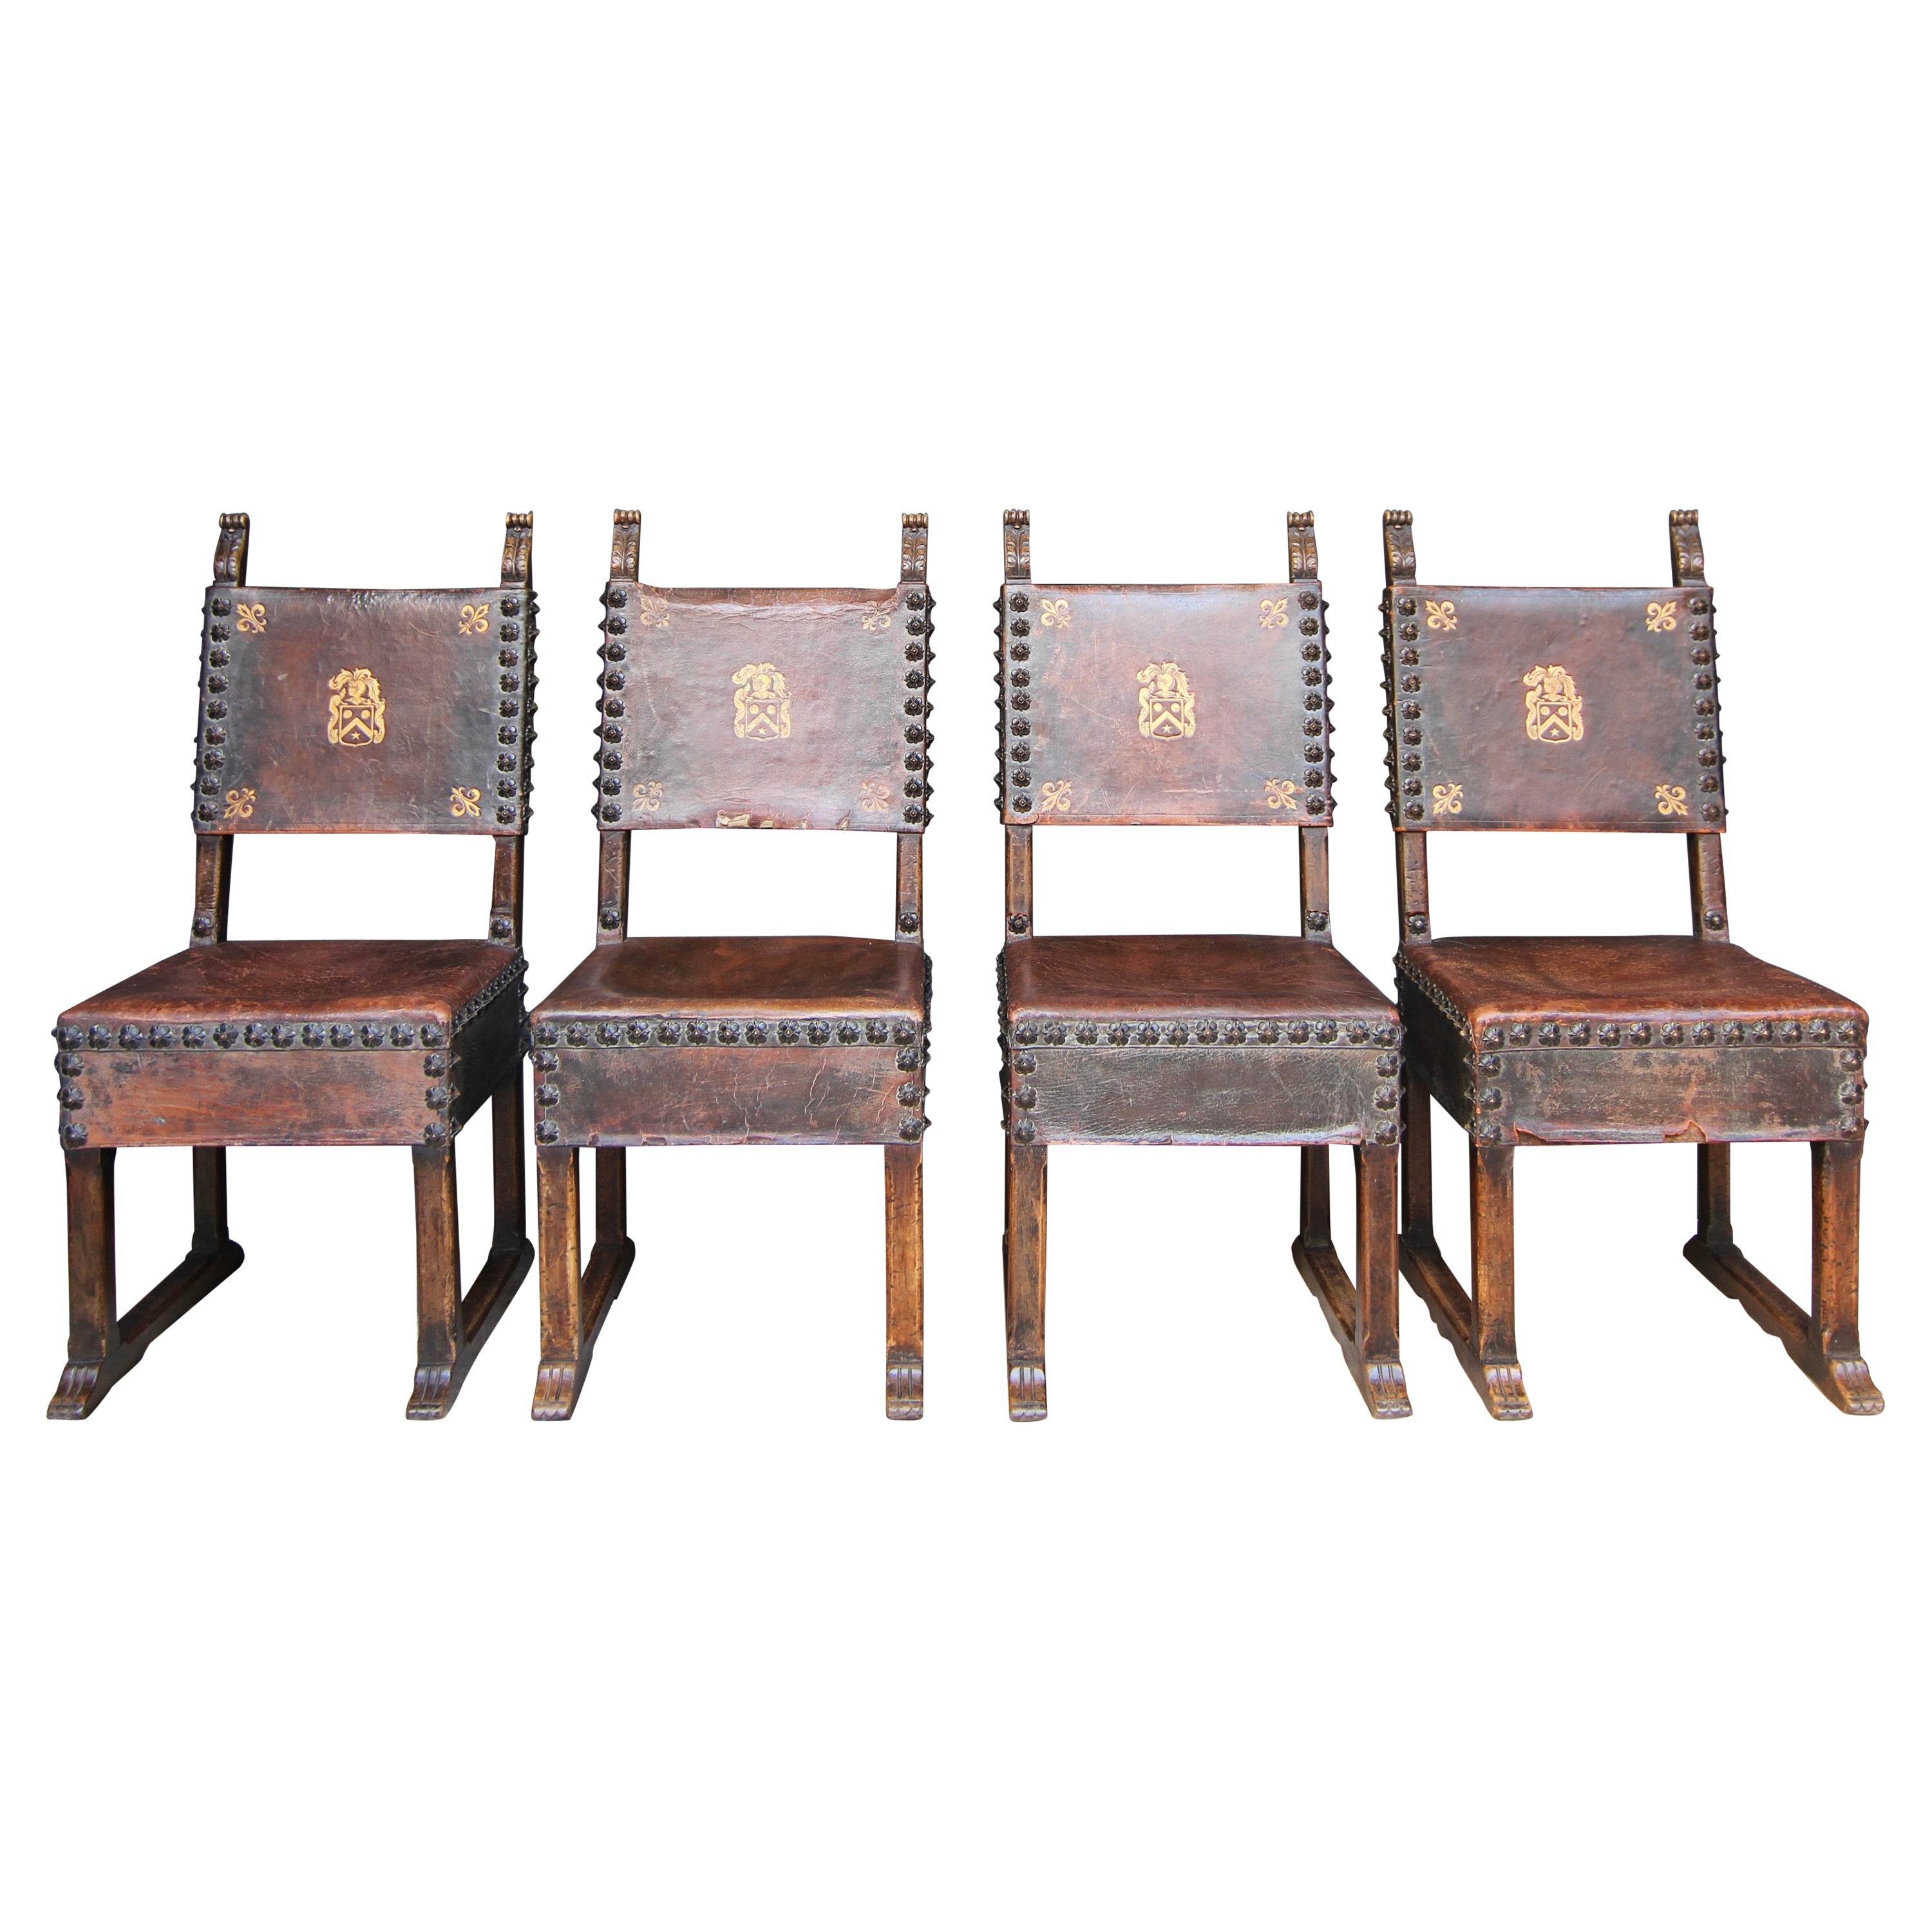 Set of 4 Walnut and Leather Renaissance Style Chairs by Krieger For Sale